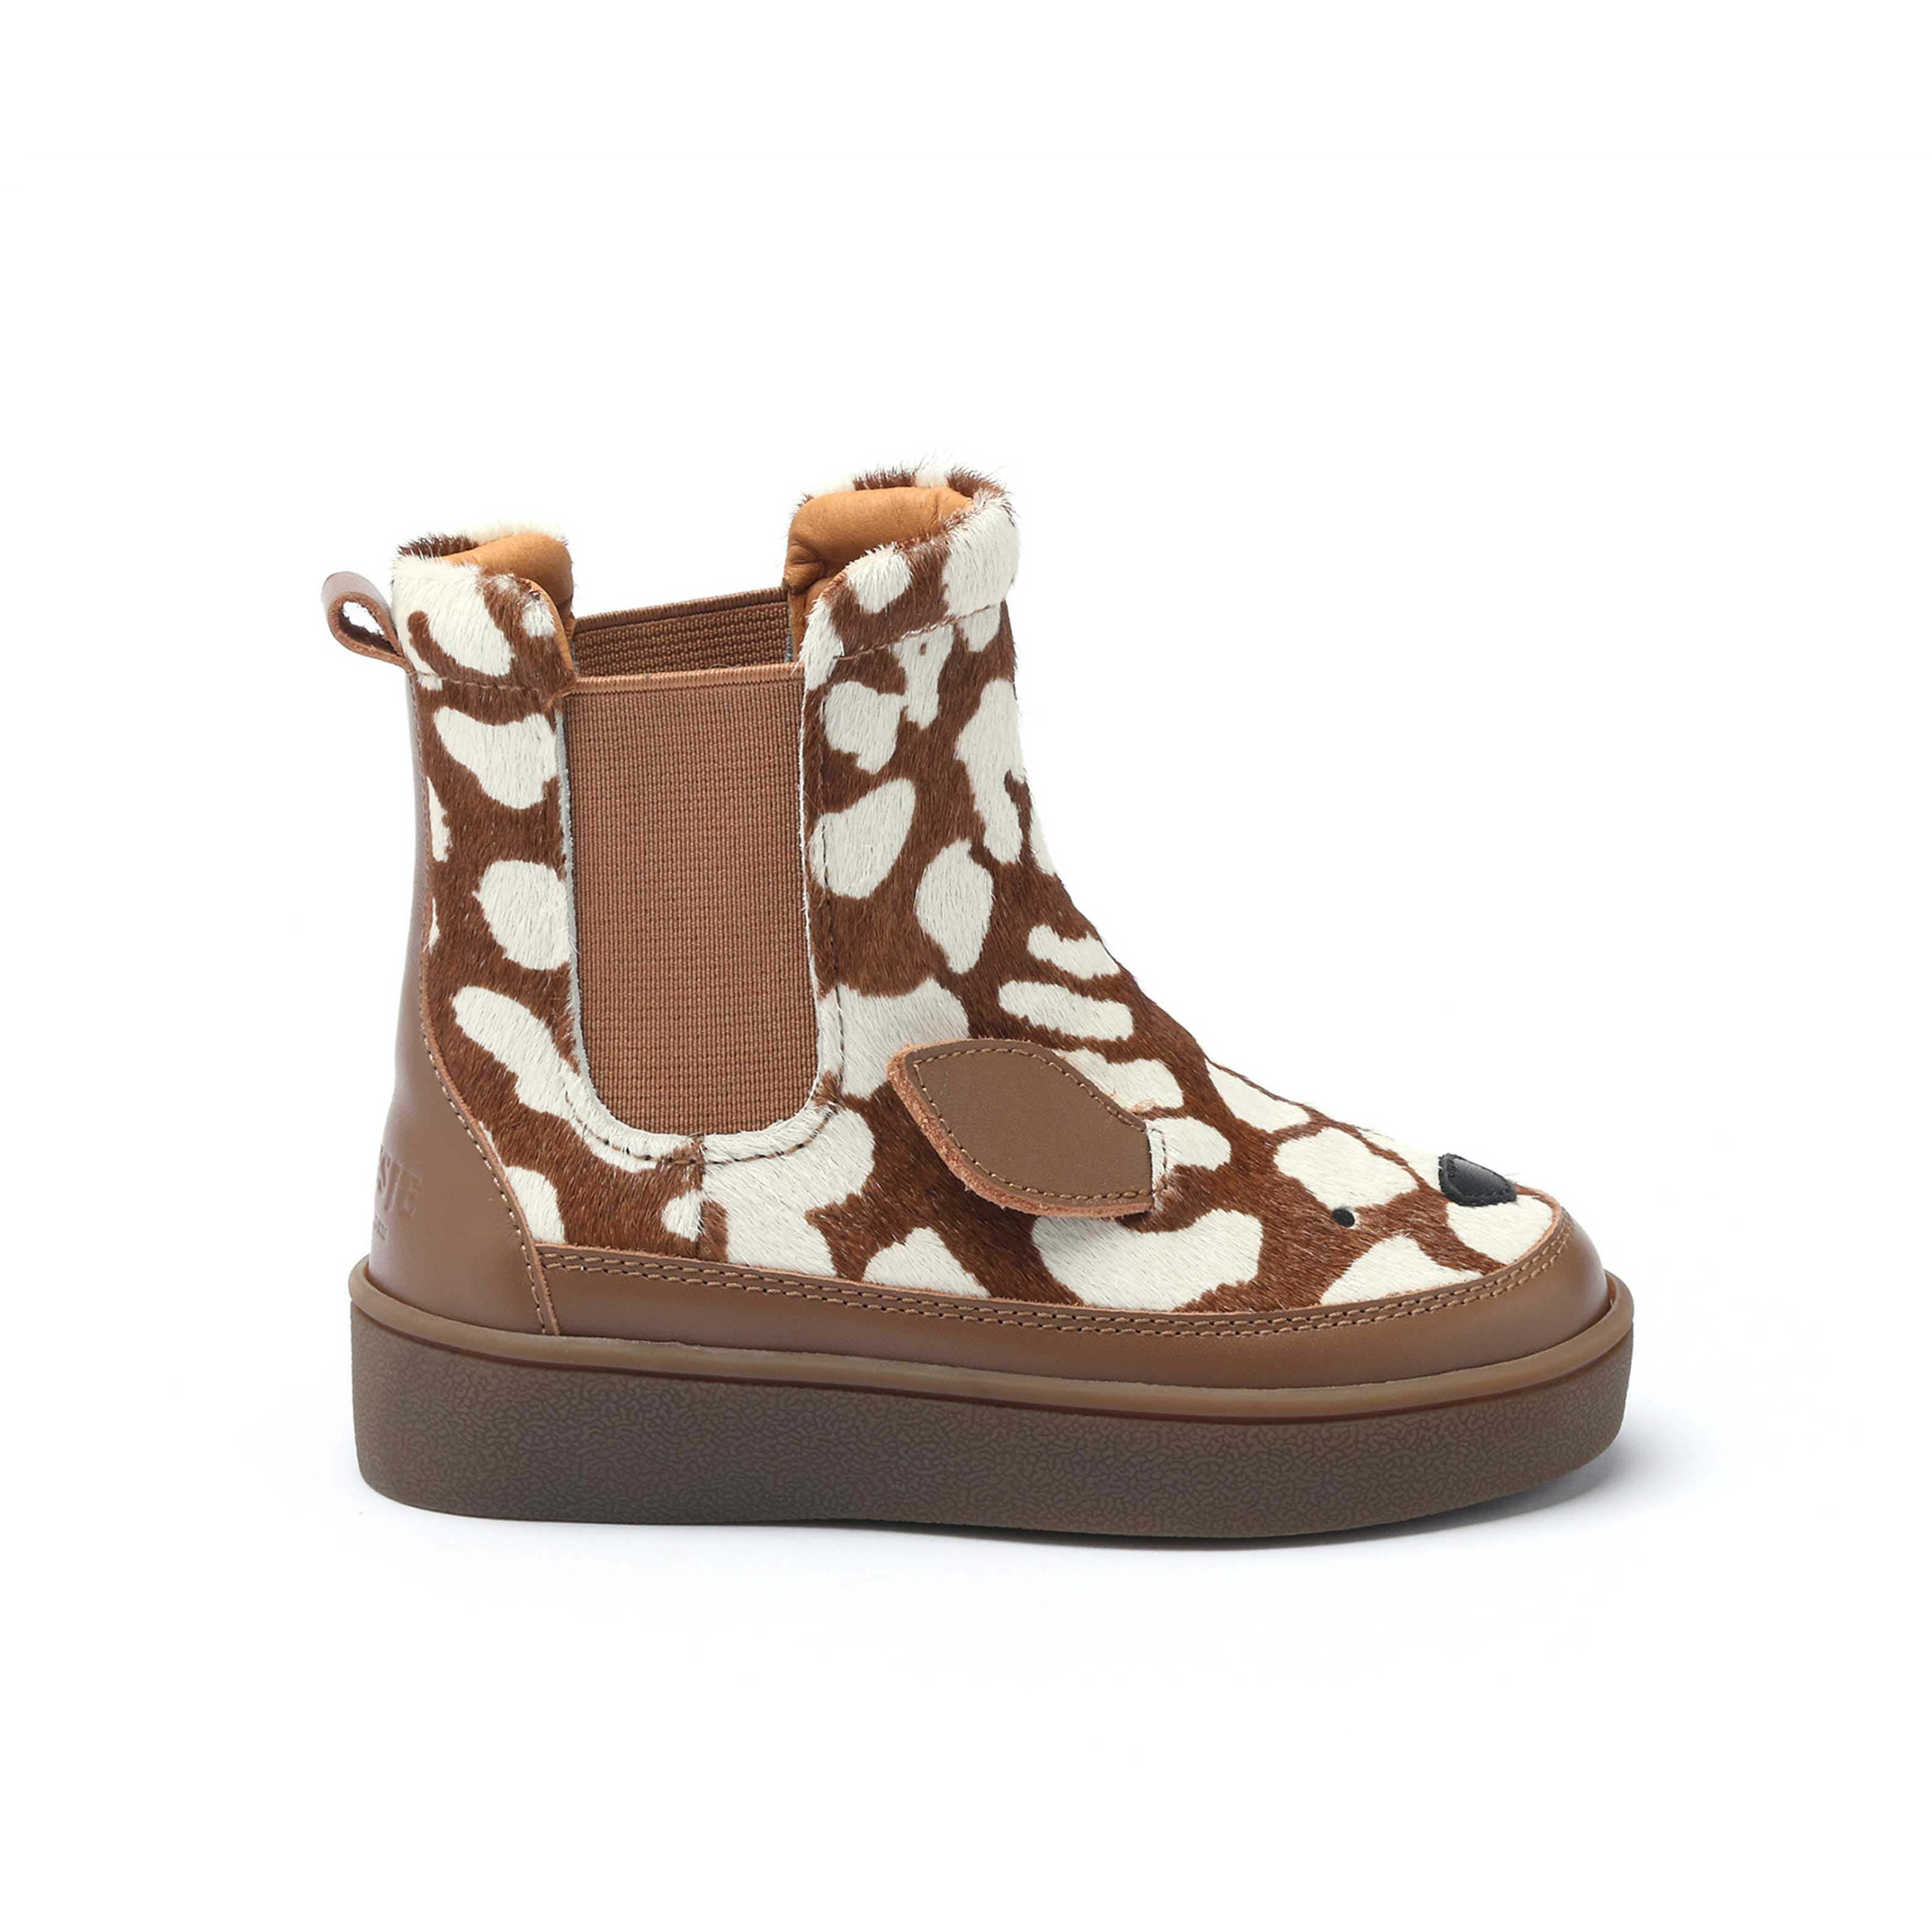 Donsje Kids Shoes Thuru Bambi Cow Hair Brown Spotted